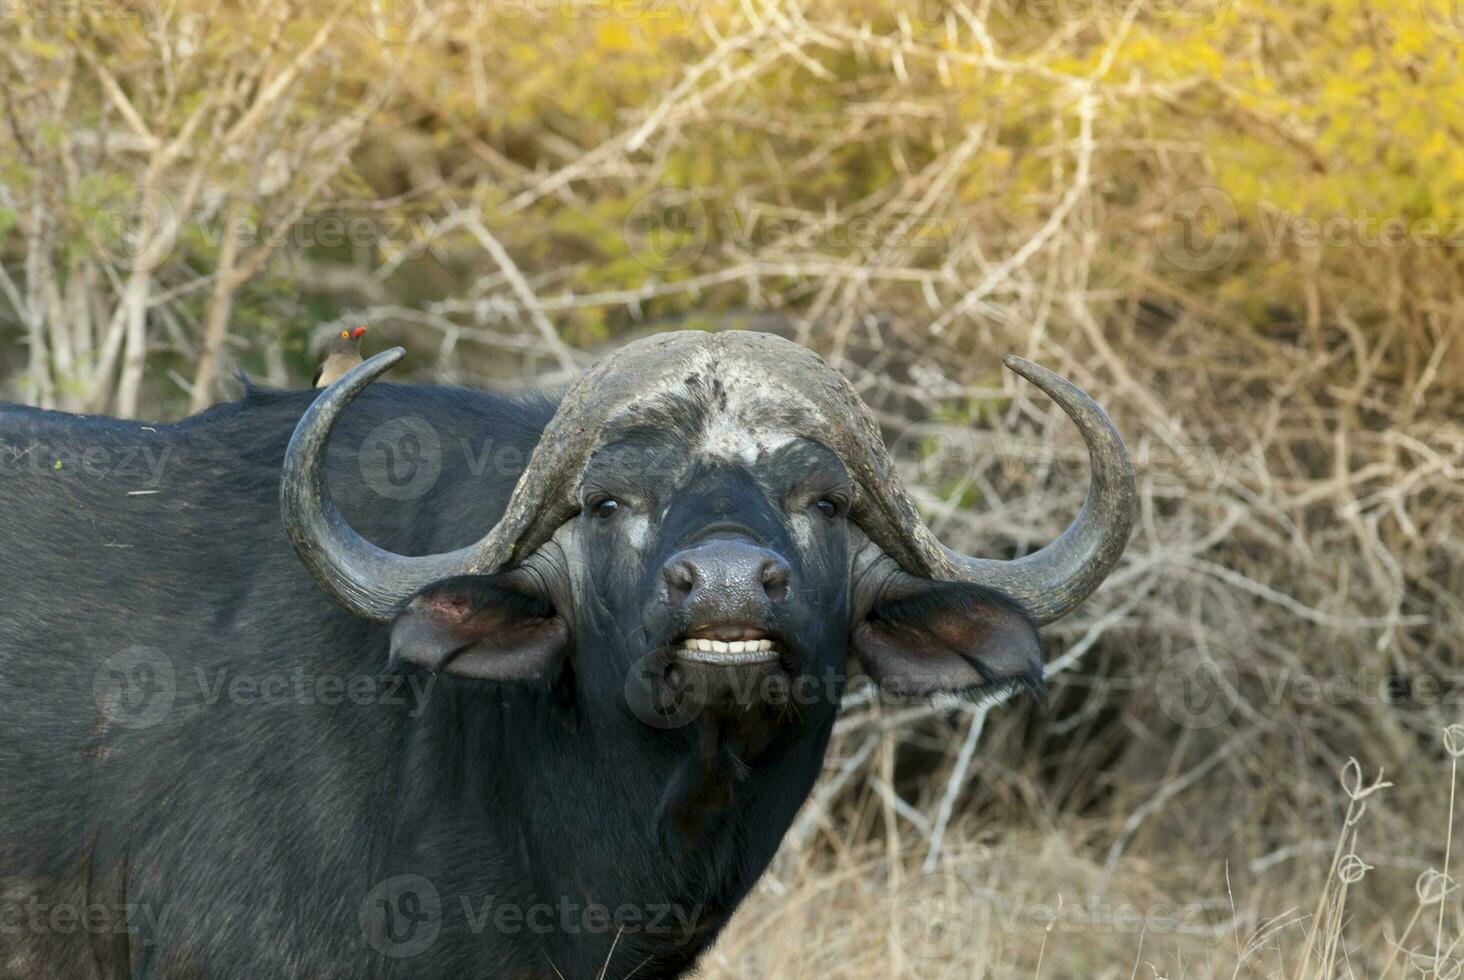 Cape Buffalo mother and calf, Kruger National Park, South Africa. photo